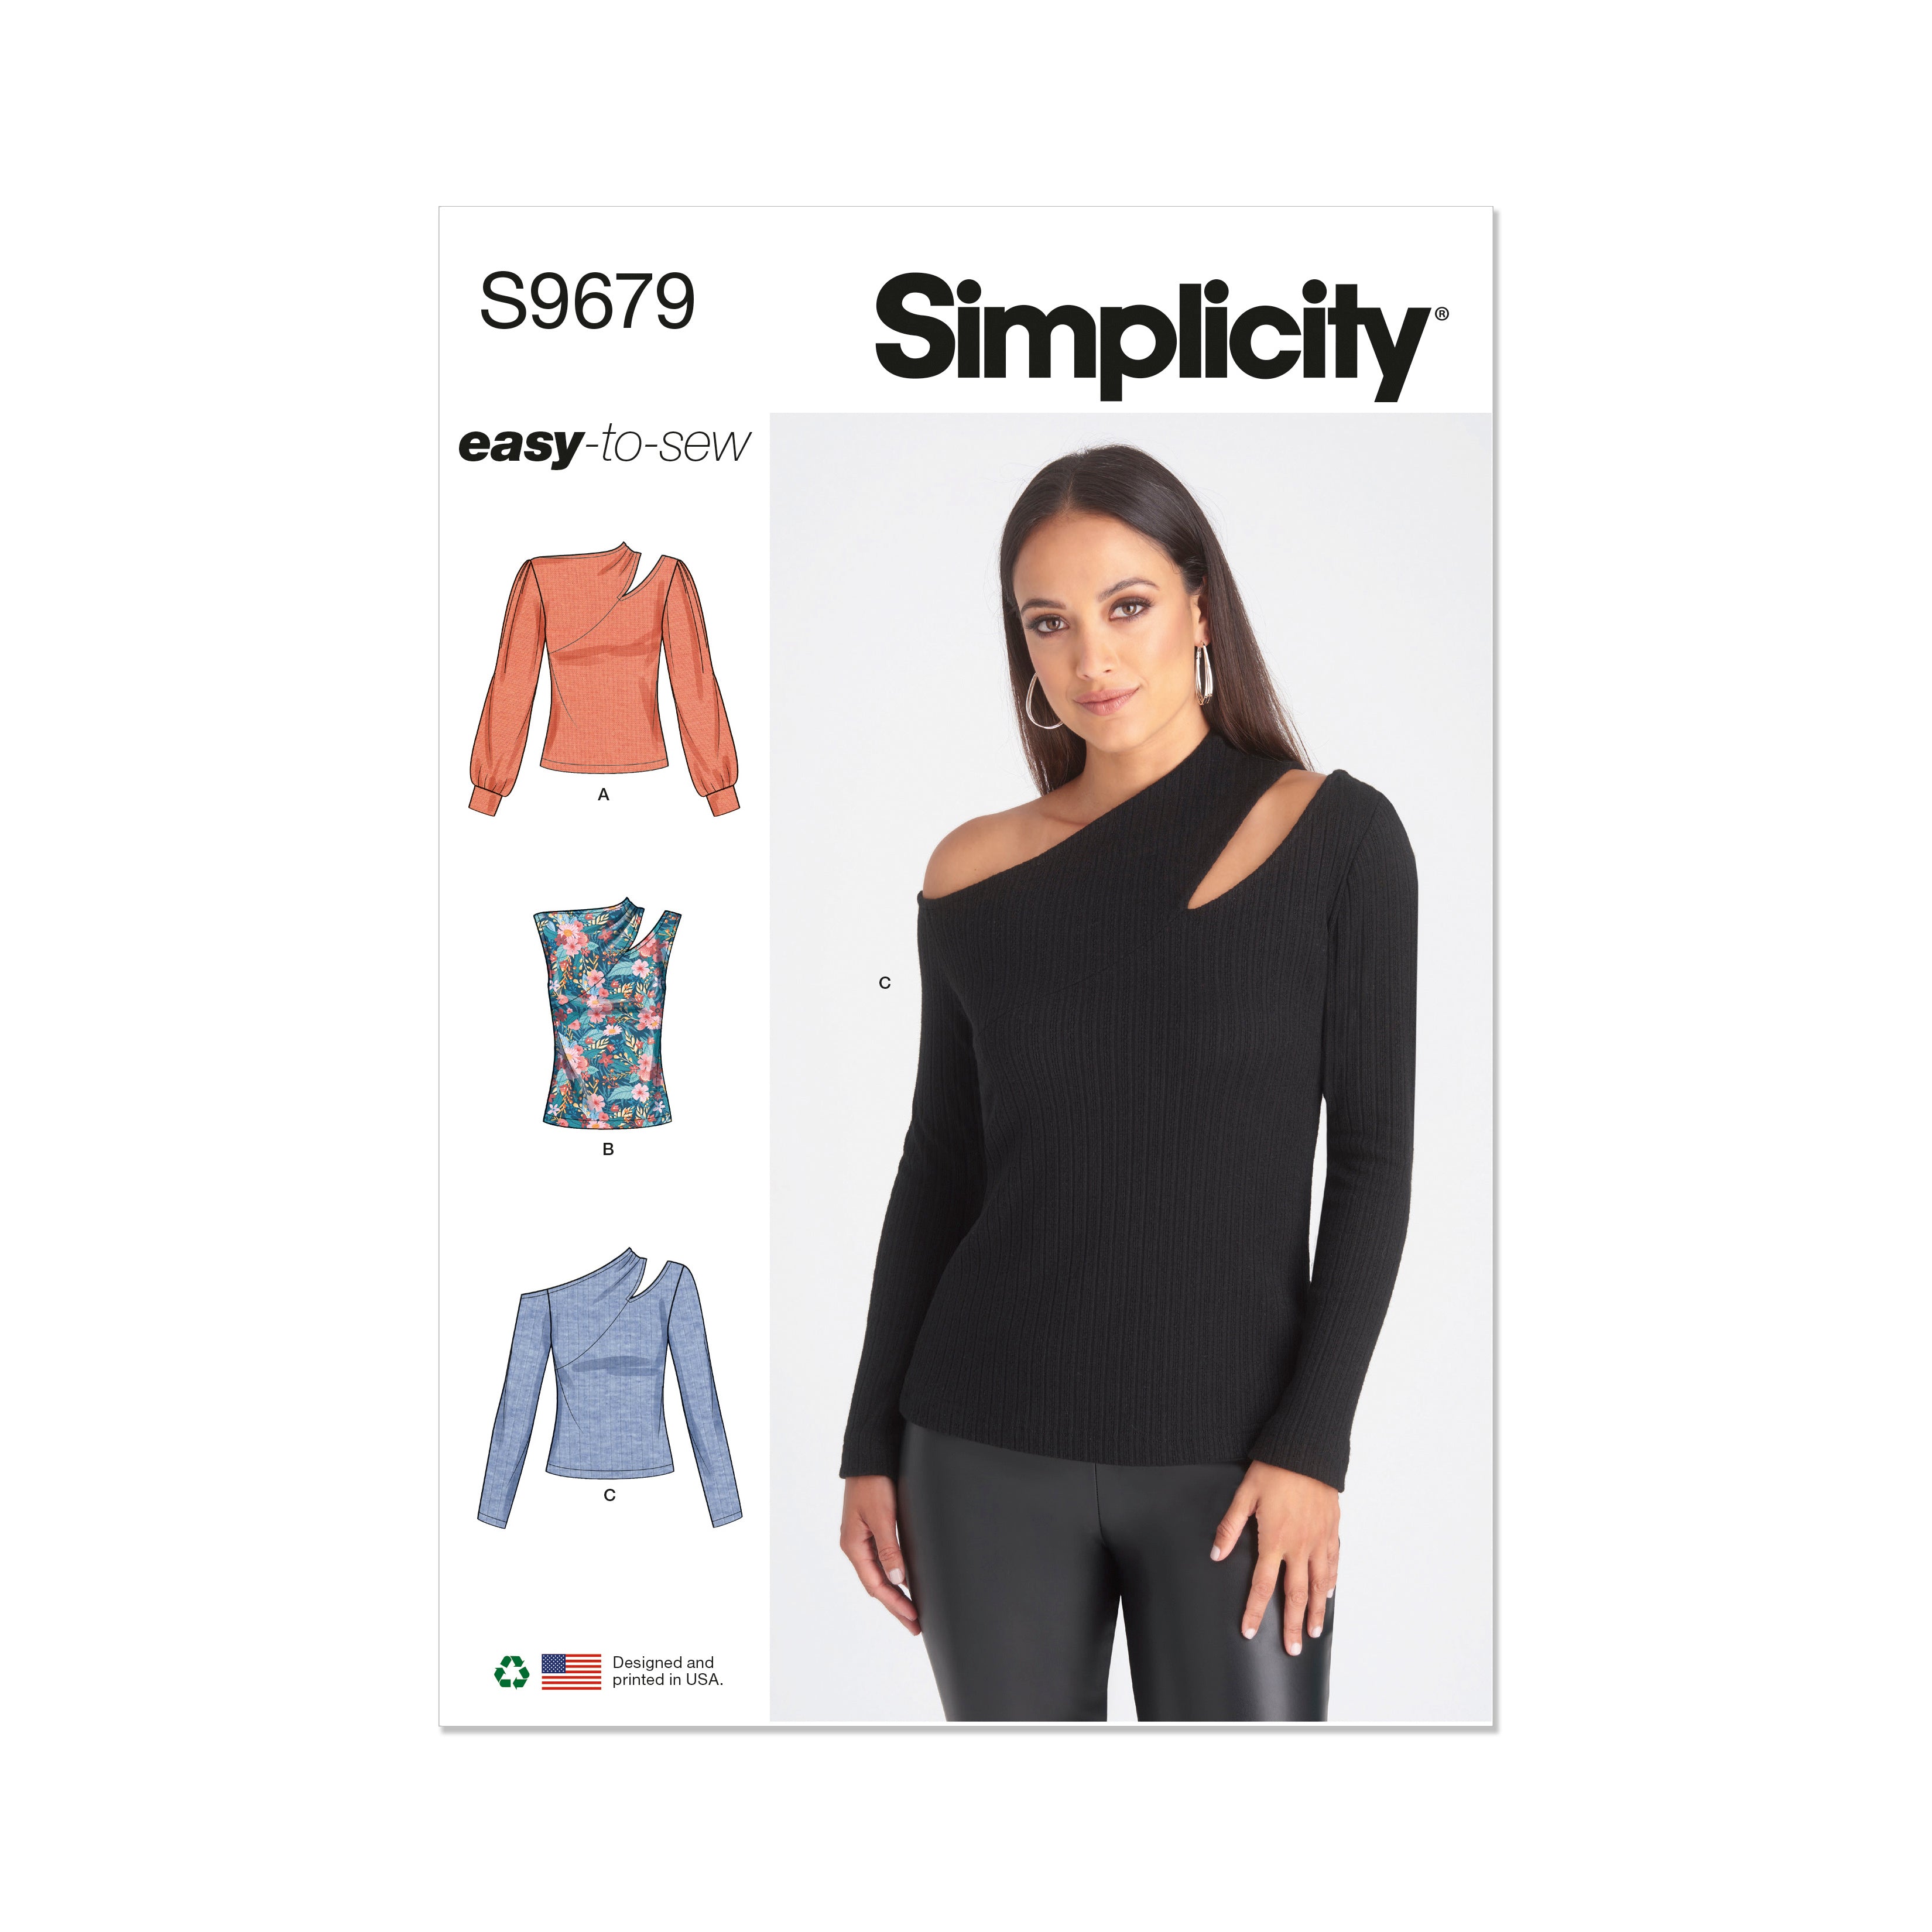 Simplicity pattern 9679 Misses' Knit Top with Sleeve Variations from Jaycotts Sewing Supplies